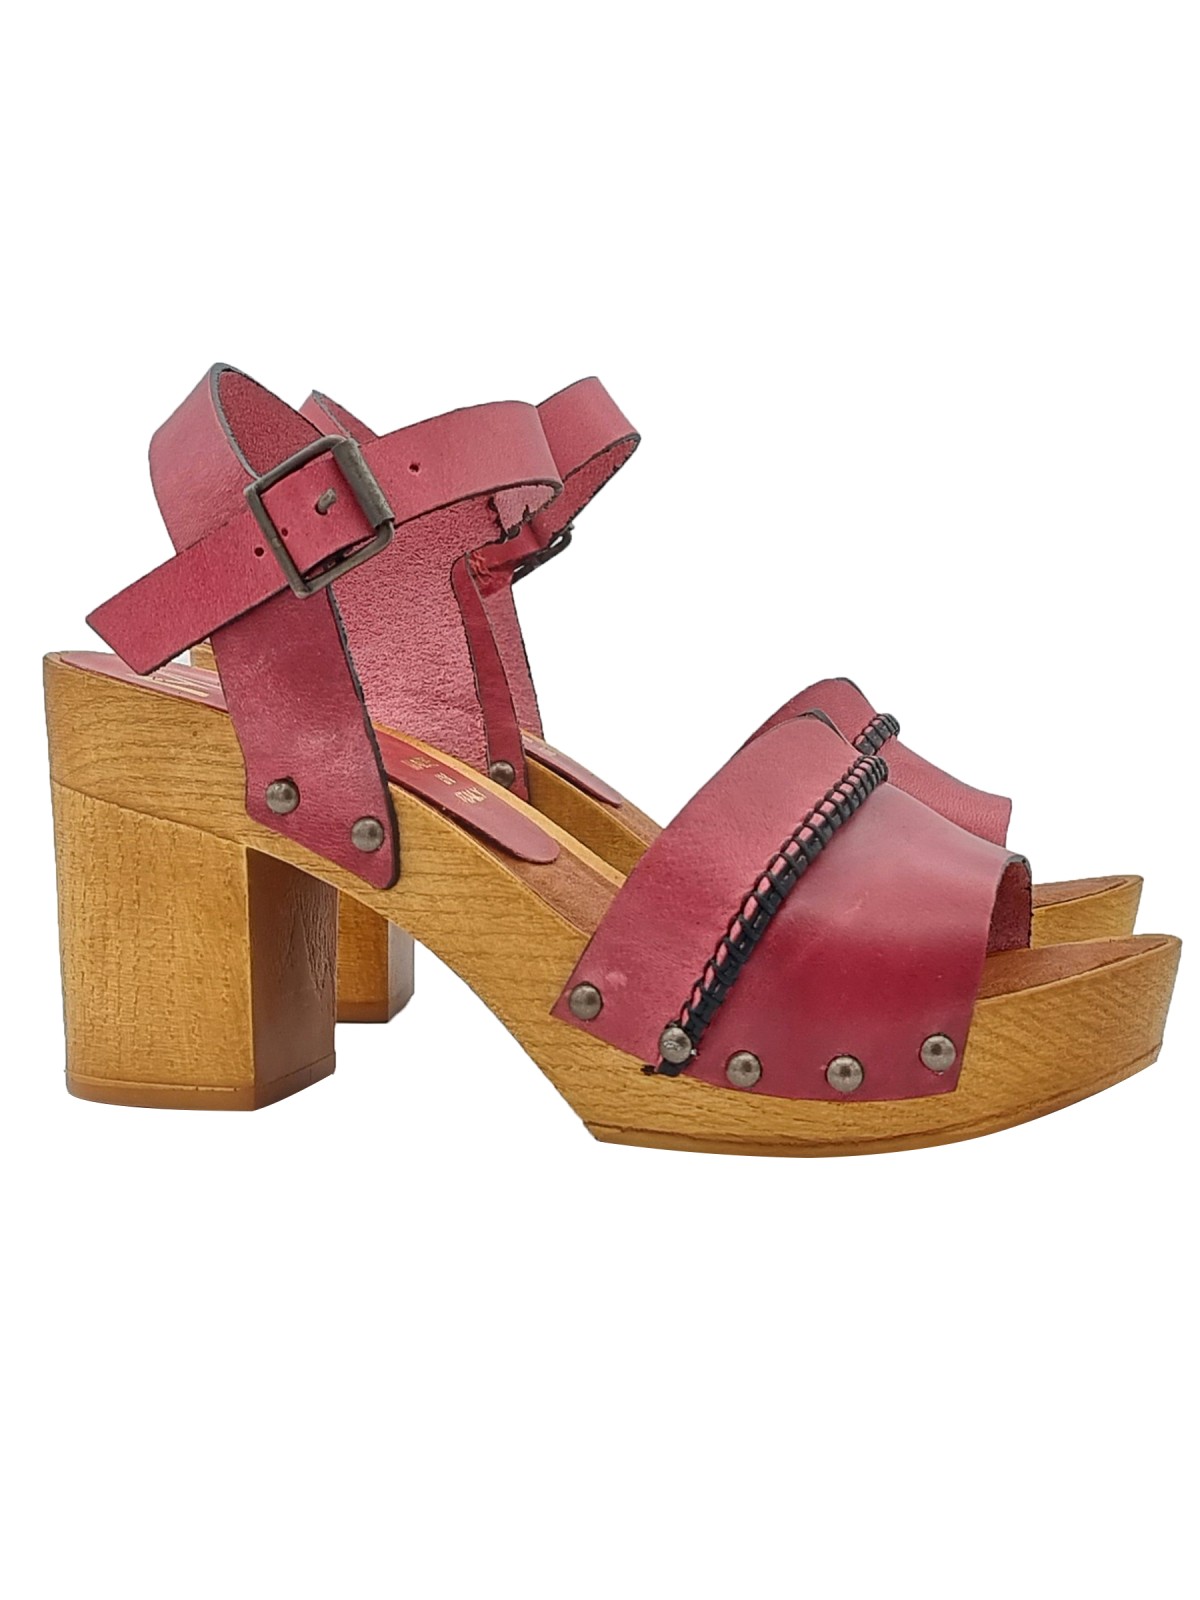 WOMEN'S SANDALS IN FUCHSIA LEATHER WITH STRAP